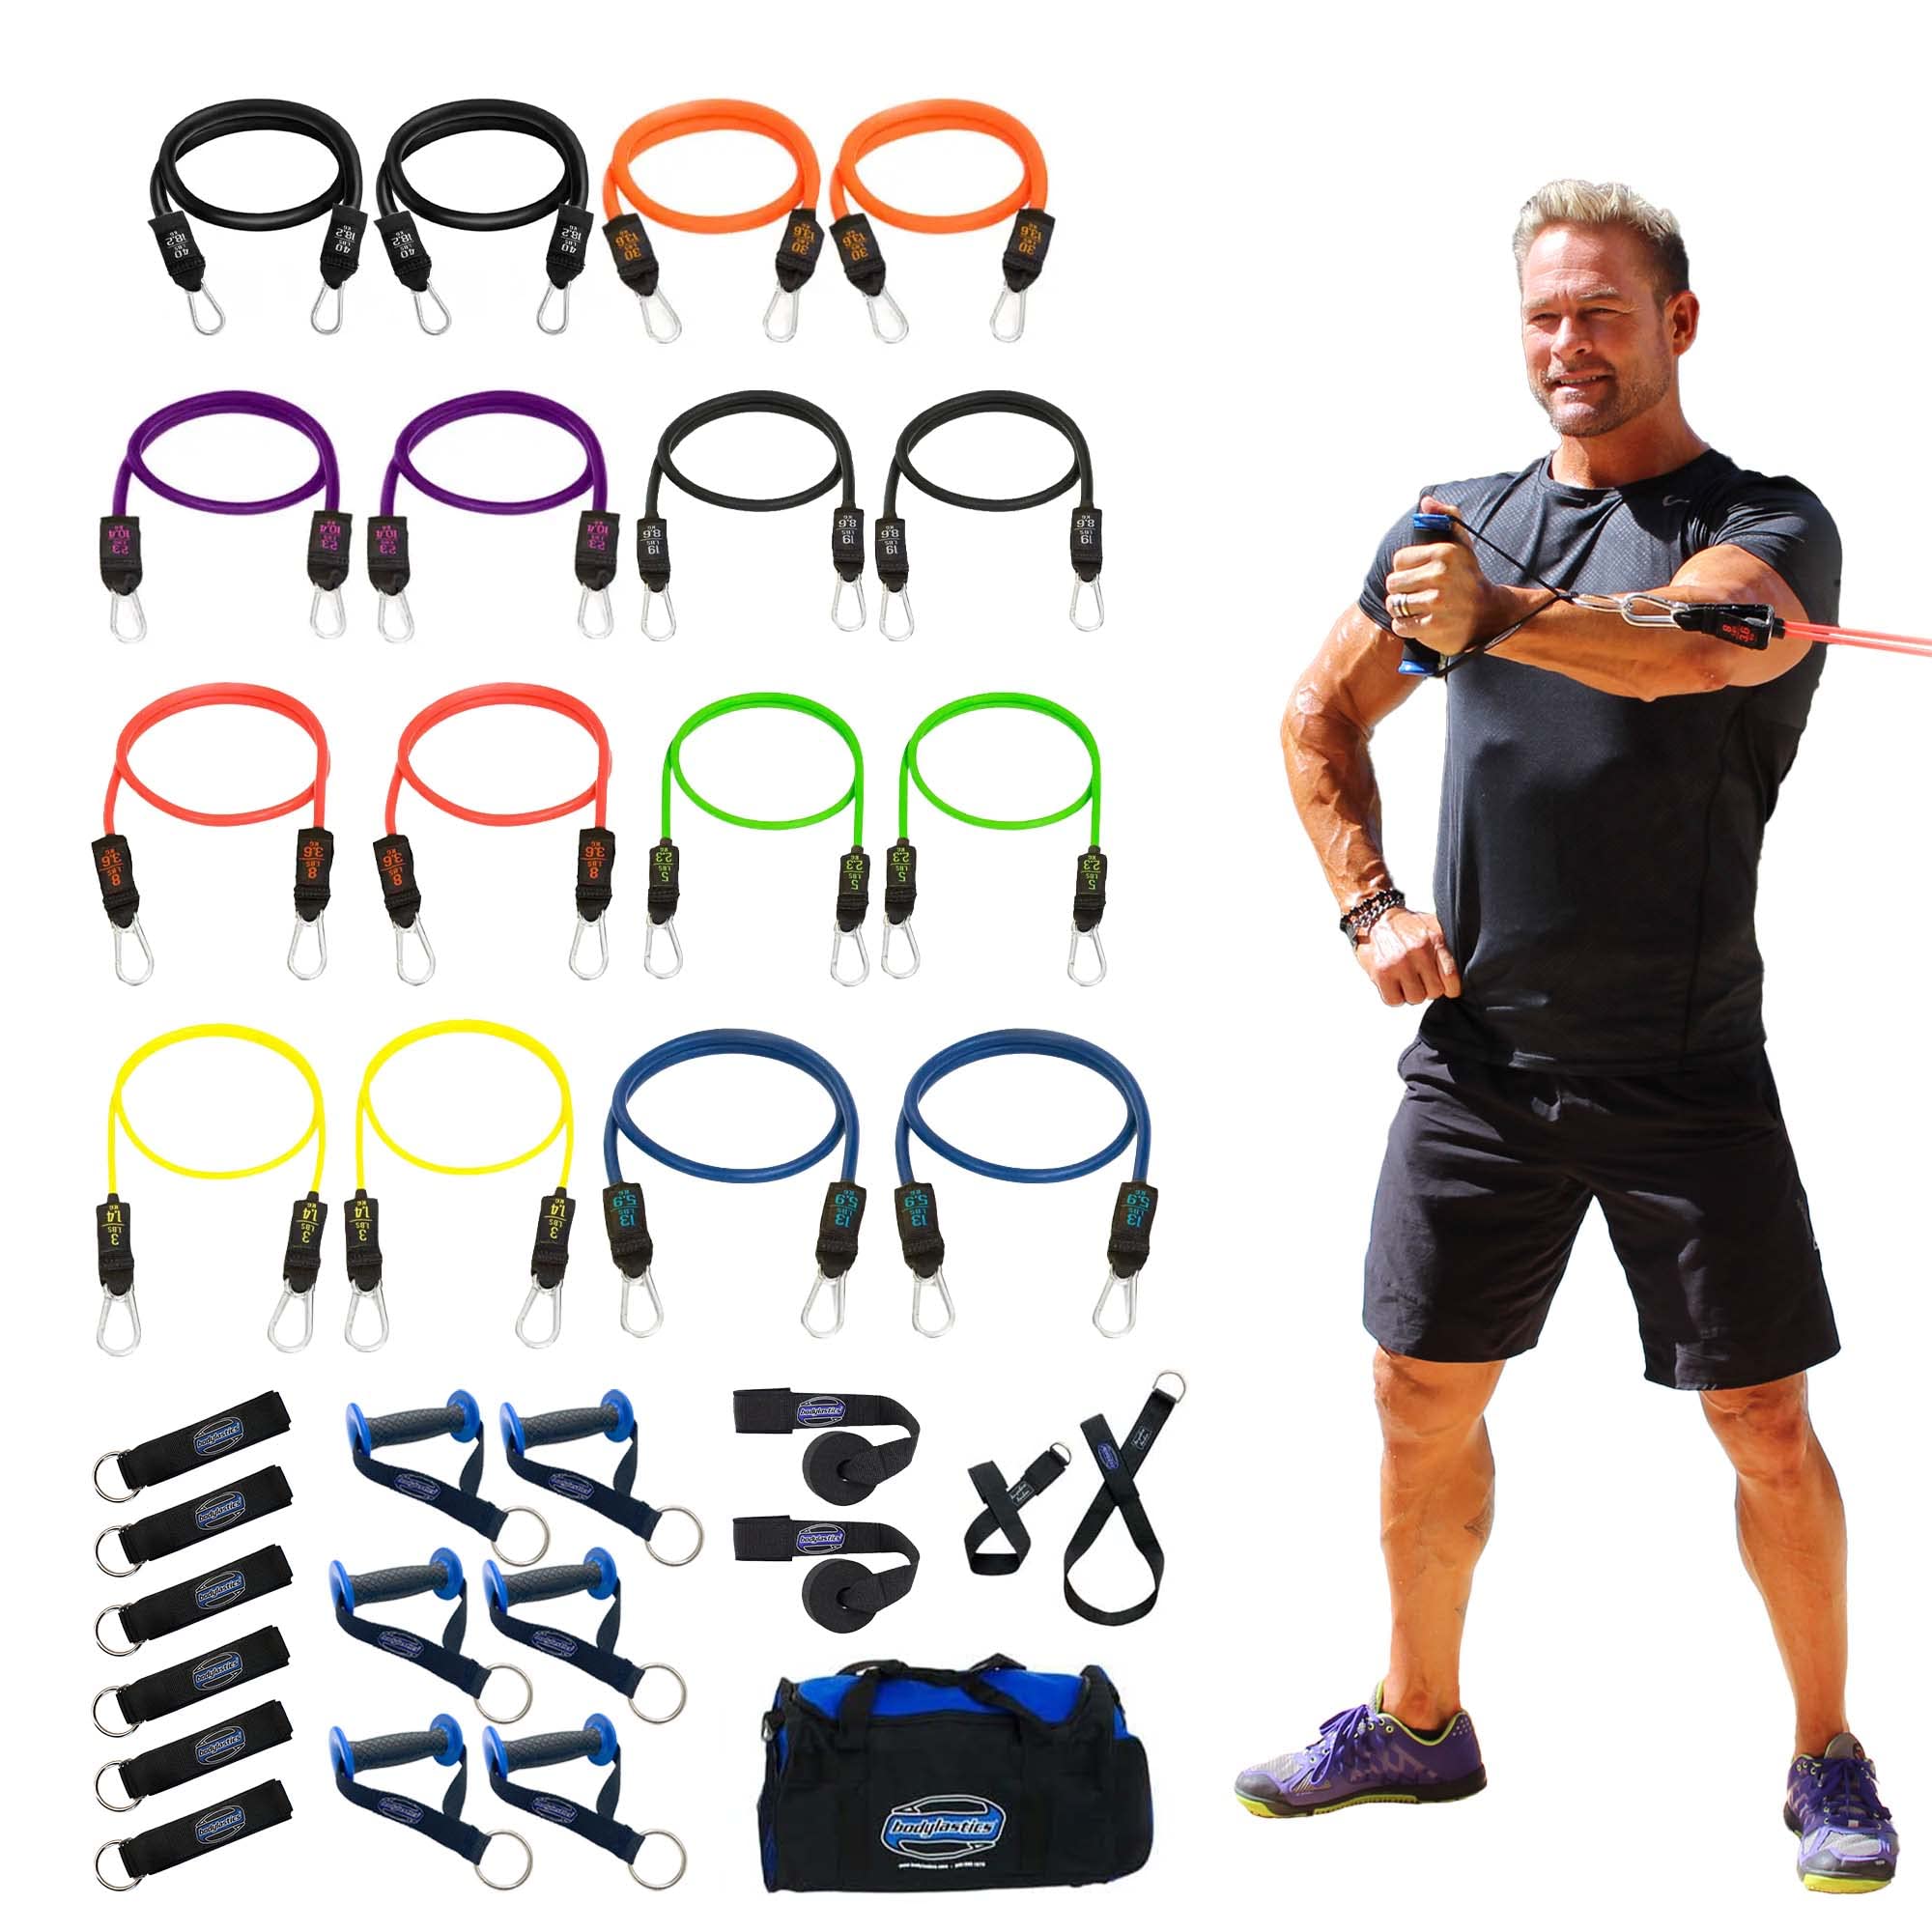 Bodylastics Resistance Band Set Resistance Bands with Handles, Ankle Straps, Door Anchor, Carry Bag Heavy Duty Stretch Exercise Bands Patented Clips and Snap Reduction Tech Fitness Workout Bands>